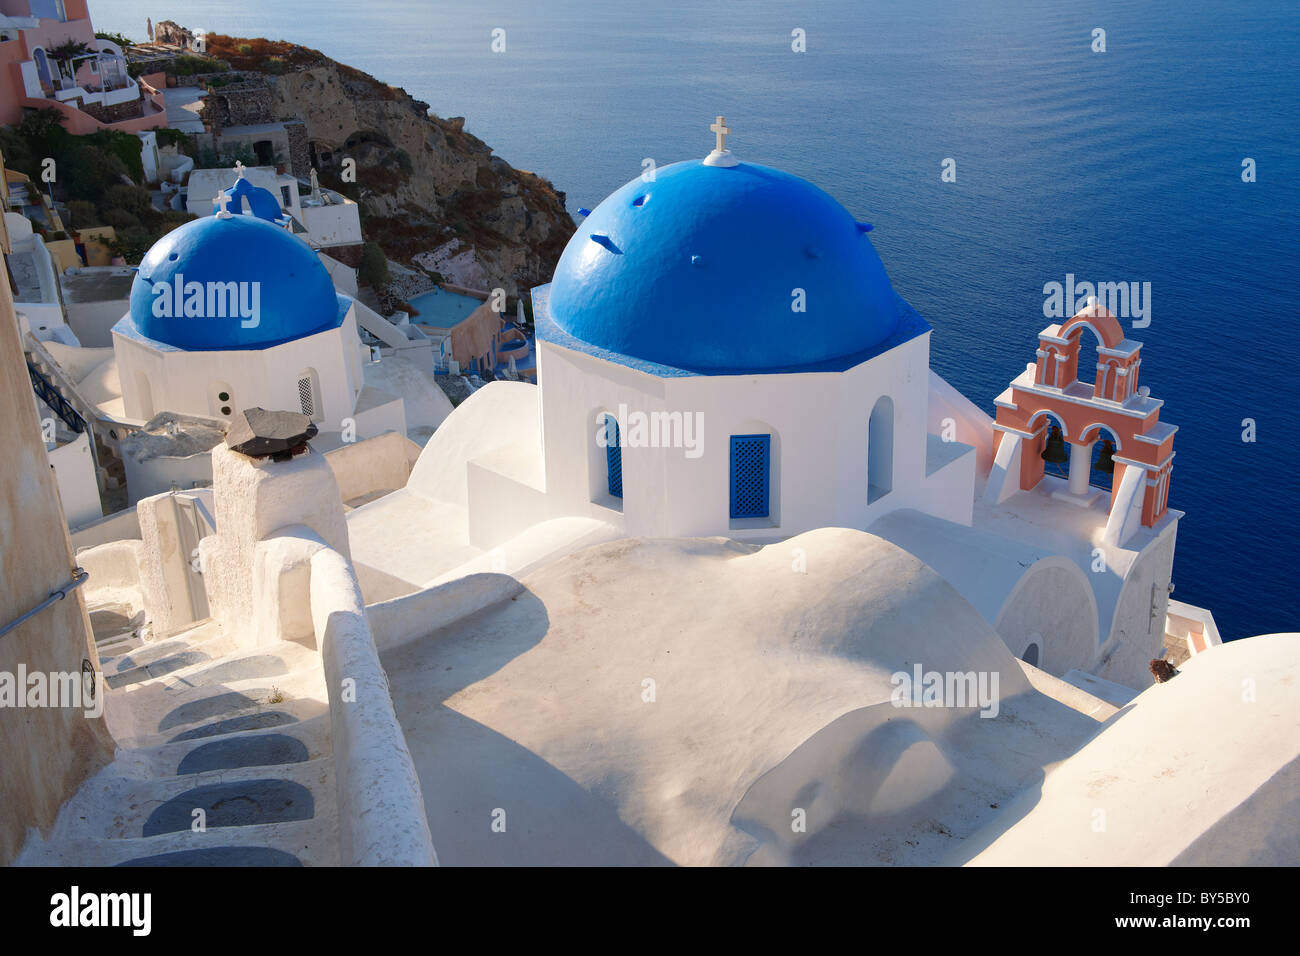 Oia, ( Ia ) Santorini - Blue domed Byzantine Orthodax churches, - Greek Cyclades islands - Photos, pictures and images Stock Photo